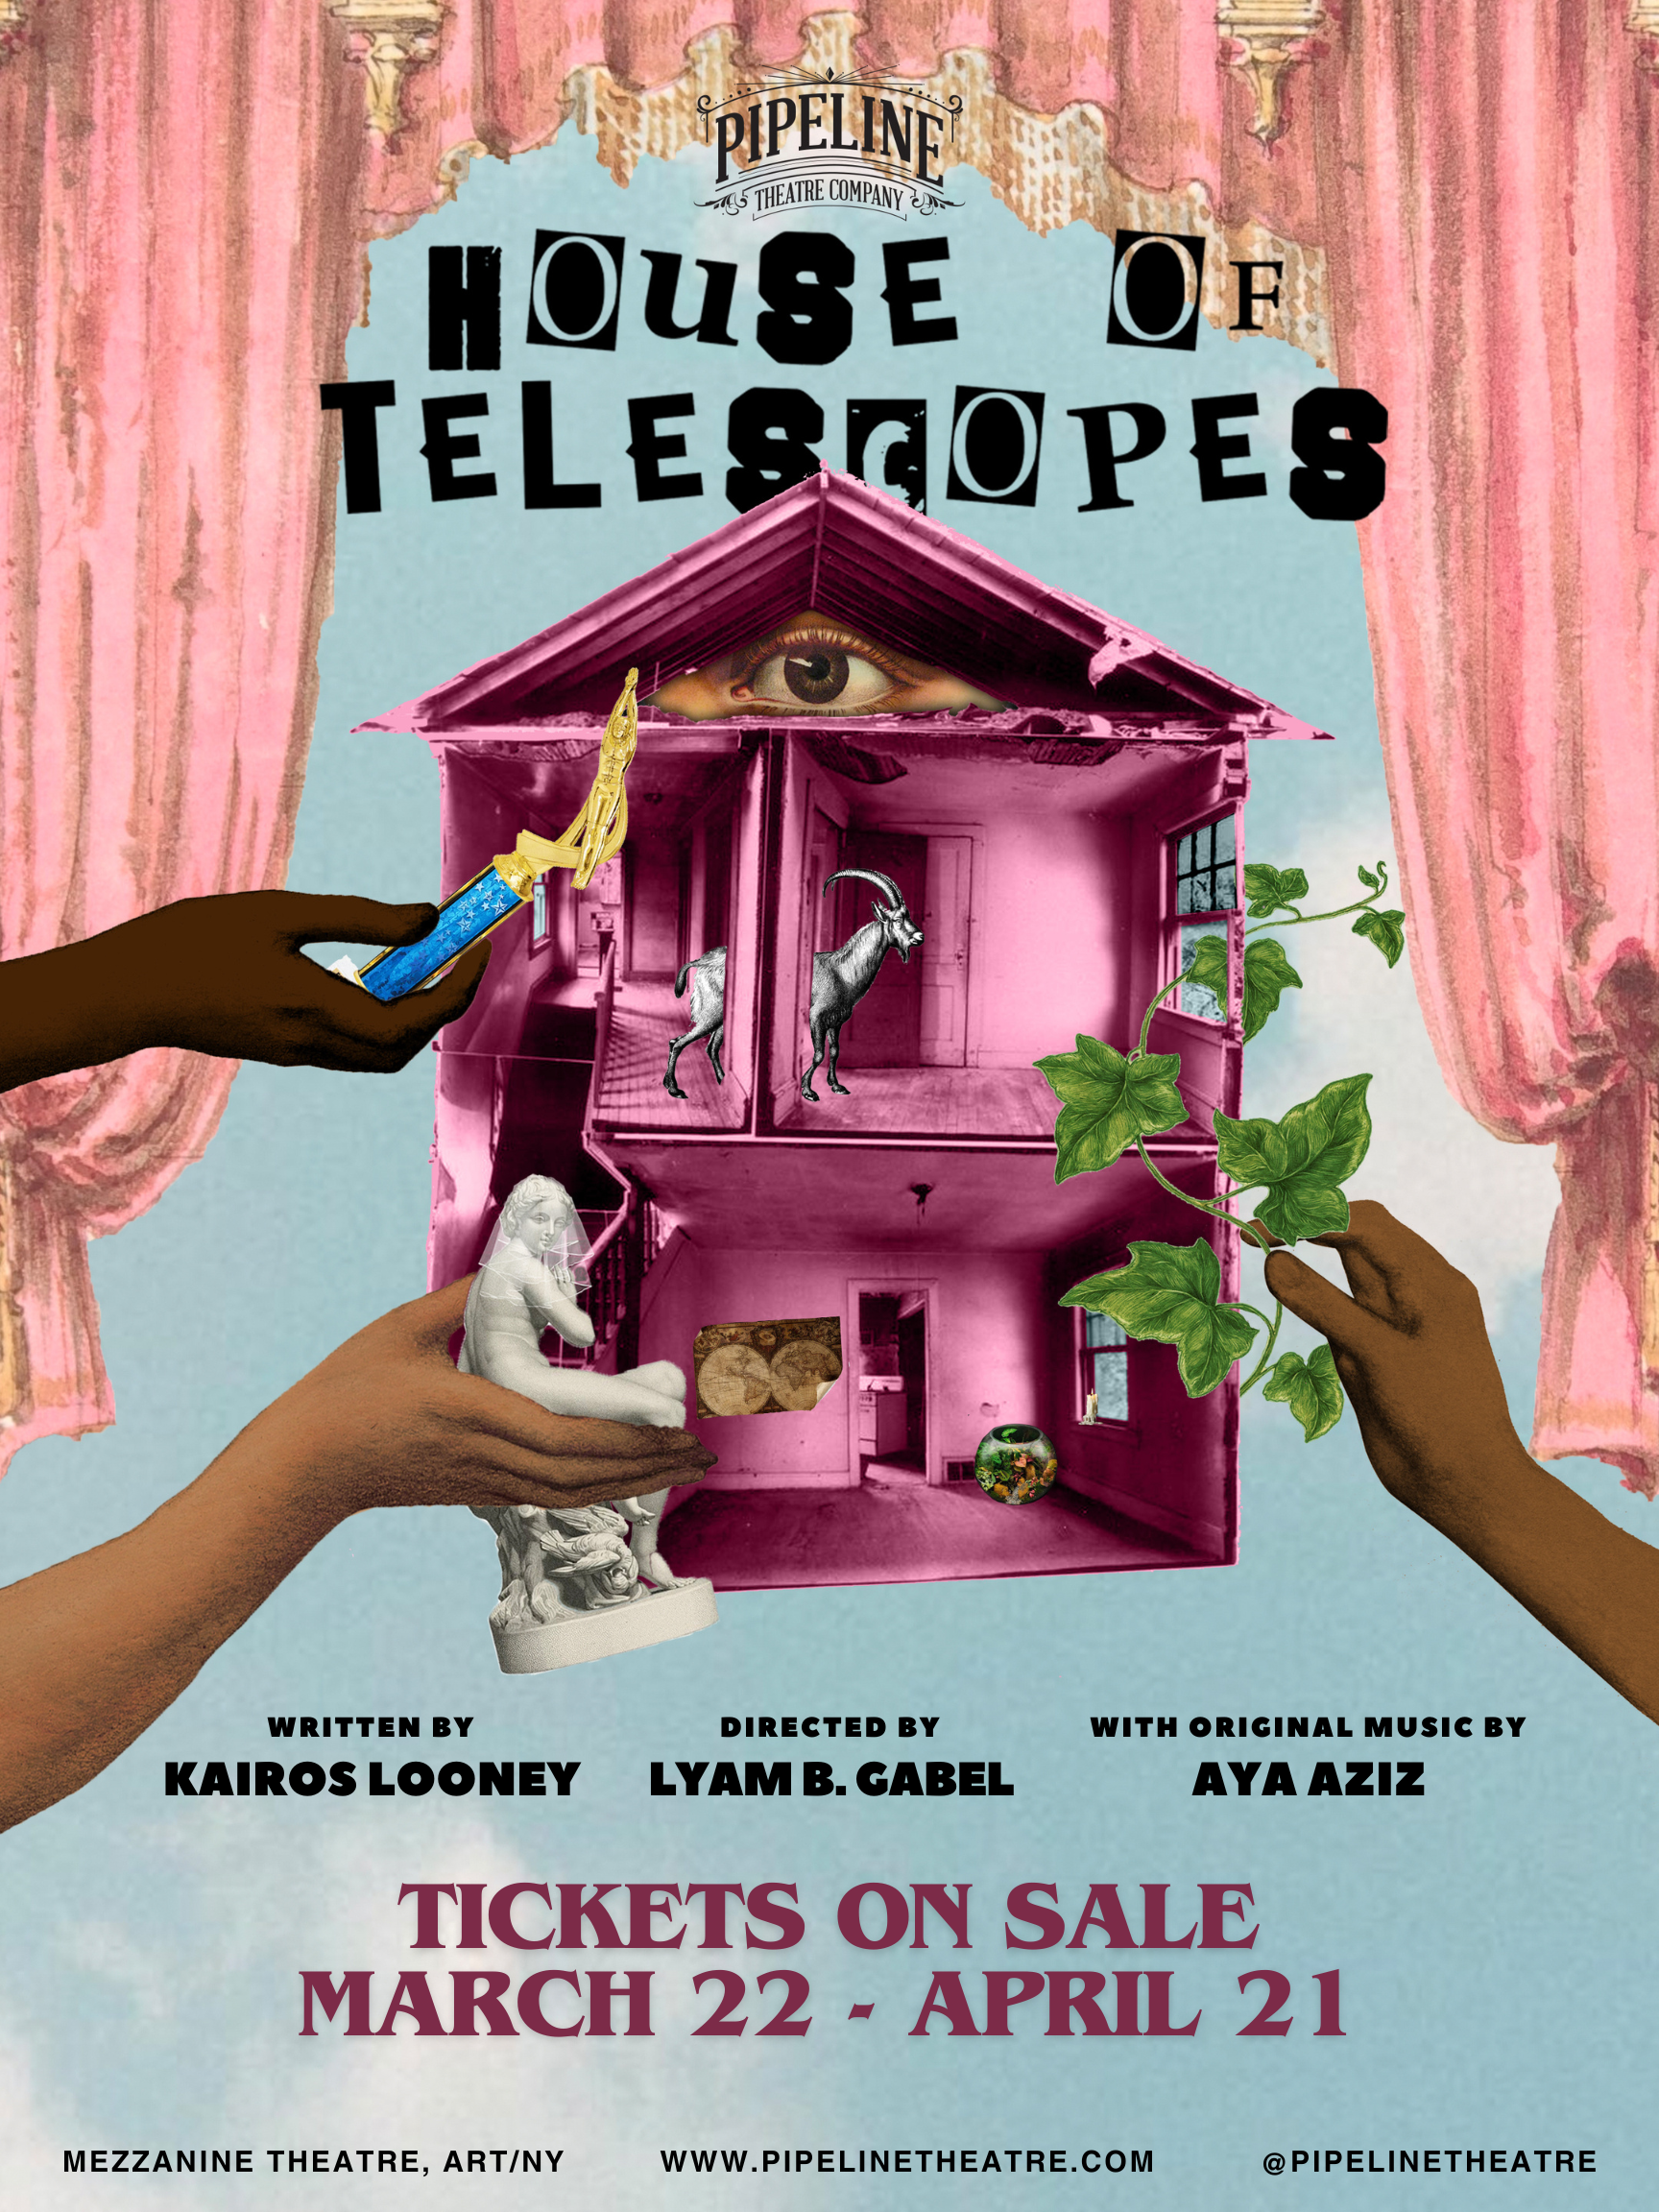 Image for House of Telescopes - the show's title is spelled in cutout letters. There is a pink curtain framing a darker pink house. In the attic of the house is a human eye staring at the viewer. There are 3 hands coming in from the sides of the frame, placing objects into the house - they are a trophy, a statue, and a vine of leaves.